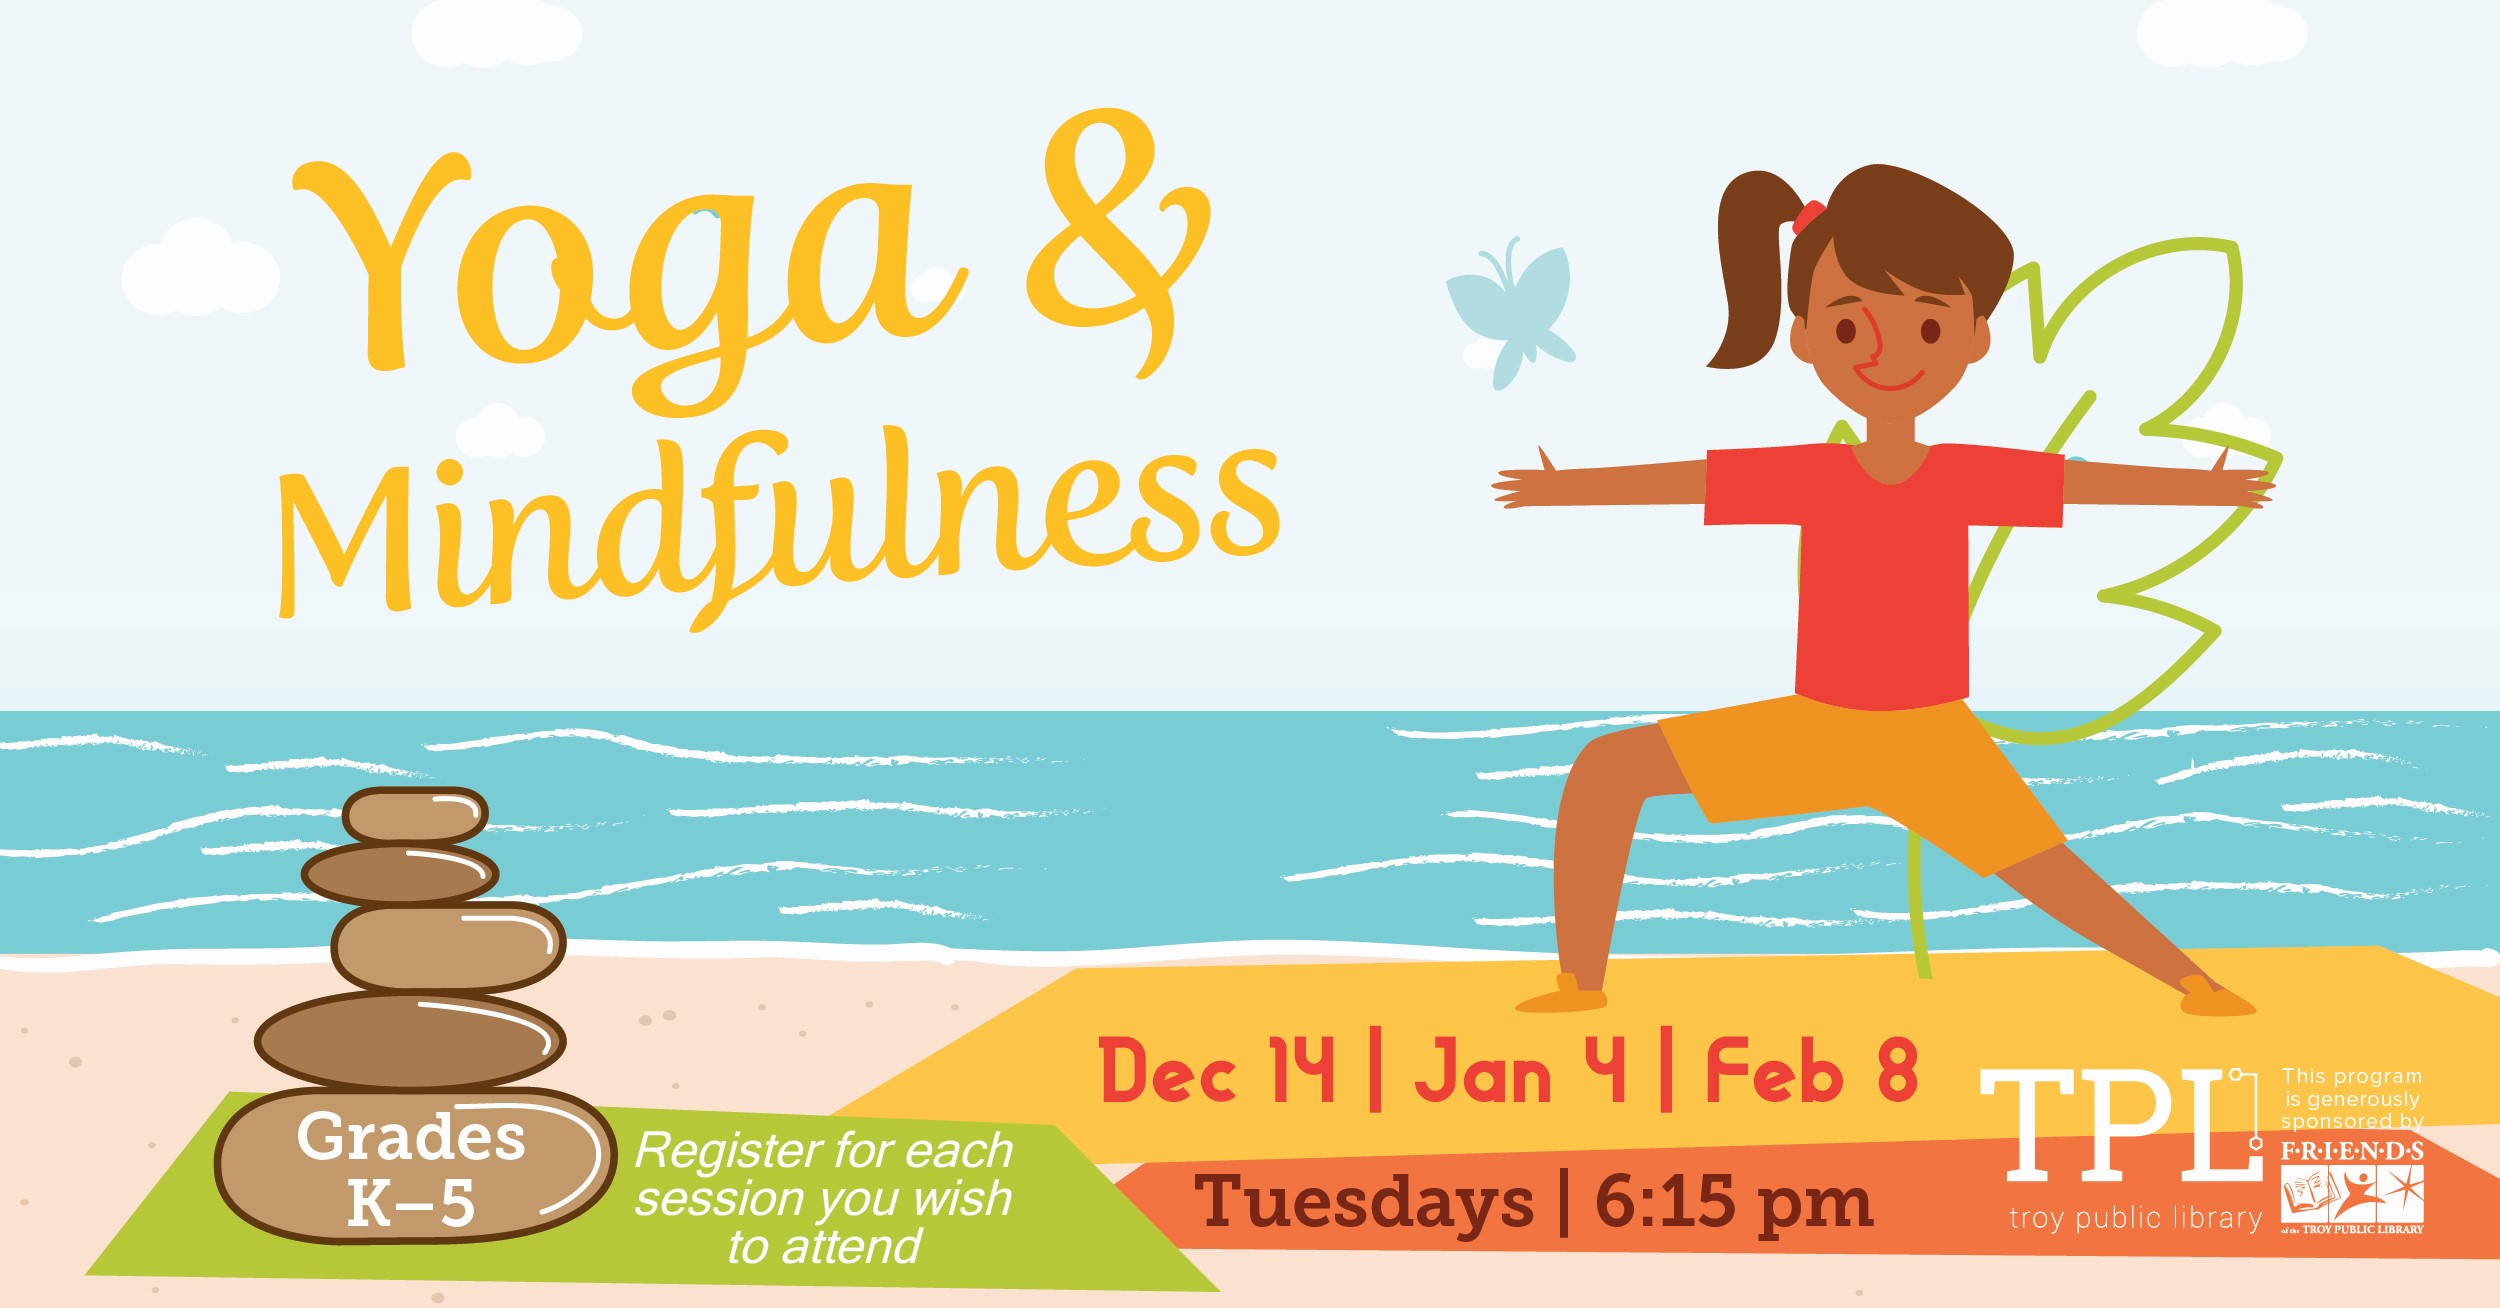 Yoga & Mindfulness Grades K-5 December 14, January 4, February 8 at 6:!5pm at the Troy Community Center. Register for all sessions you wish to attend. Sponsored by the Friends of the Troy Public Library.  